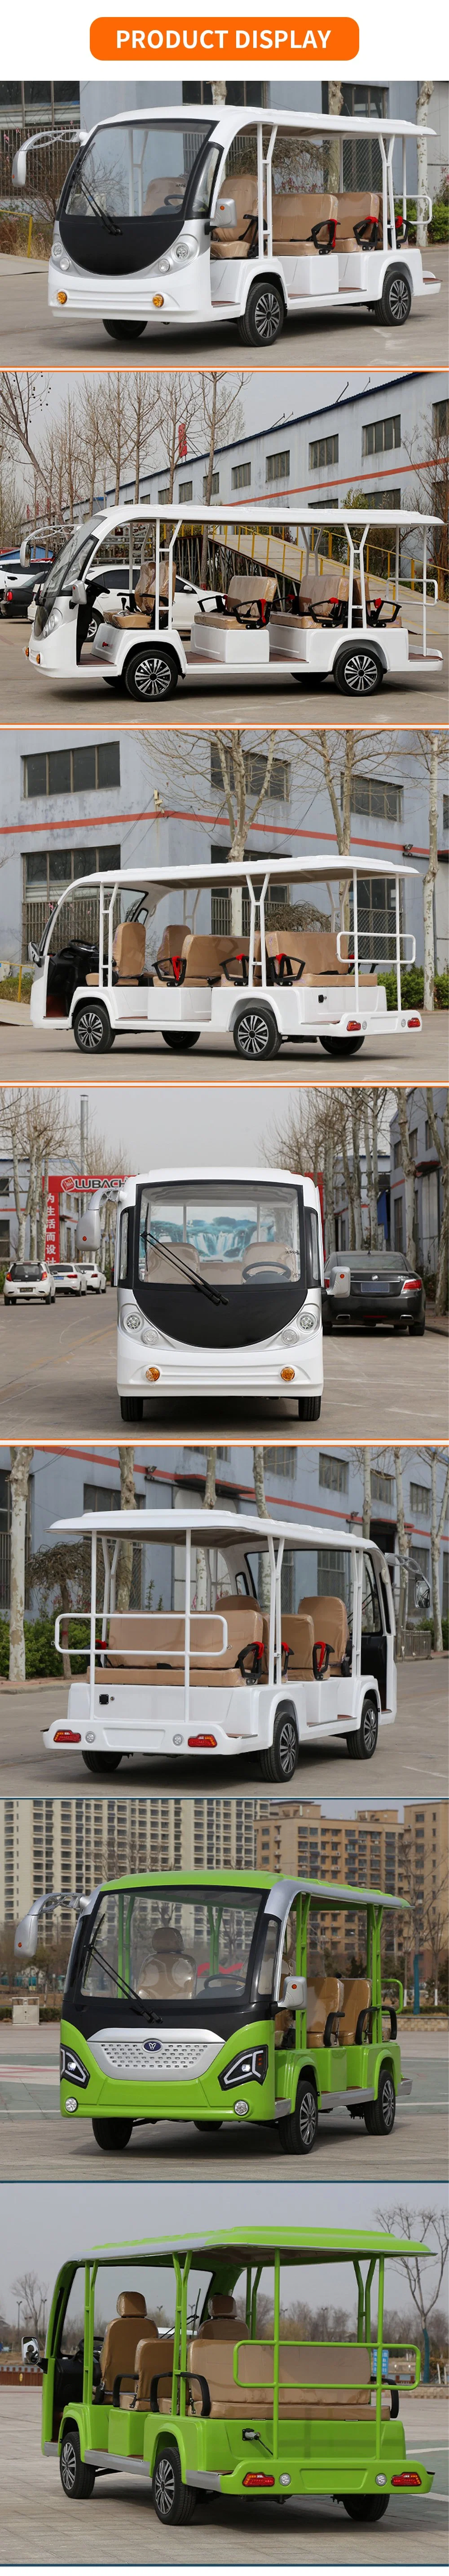 Tourist Hotels and Parks 11-Seat Electric Sightseeing Buses Sightseeing Vehicles in Scenic Spots